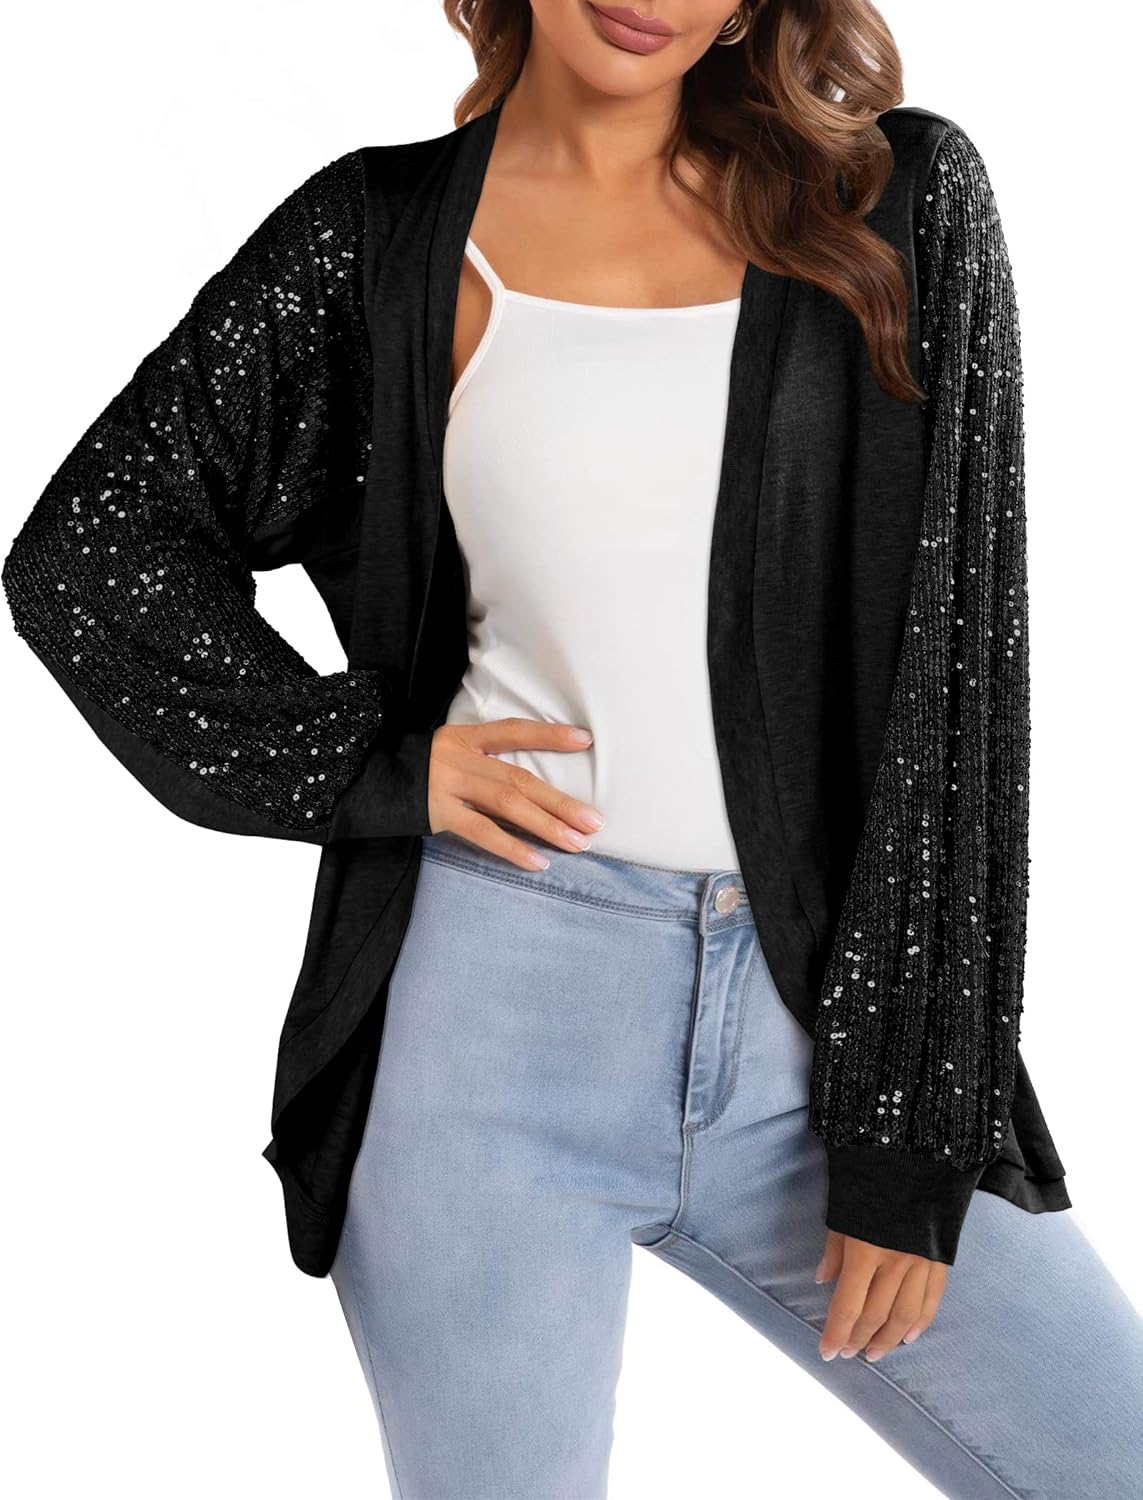 ALLTB Sequin Cardigans for Women Sparkly Long Sleeve Shirts Tops Open Front Outerwear Coat Shimmer Glitter Loose Jackets